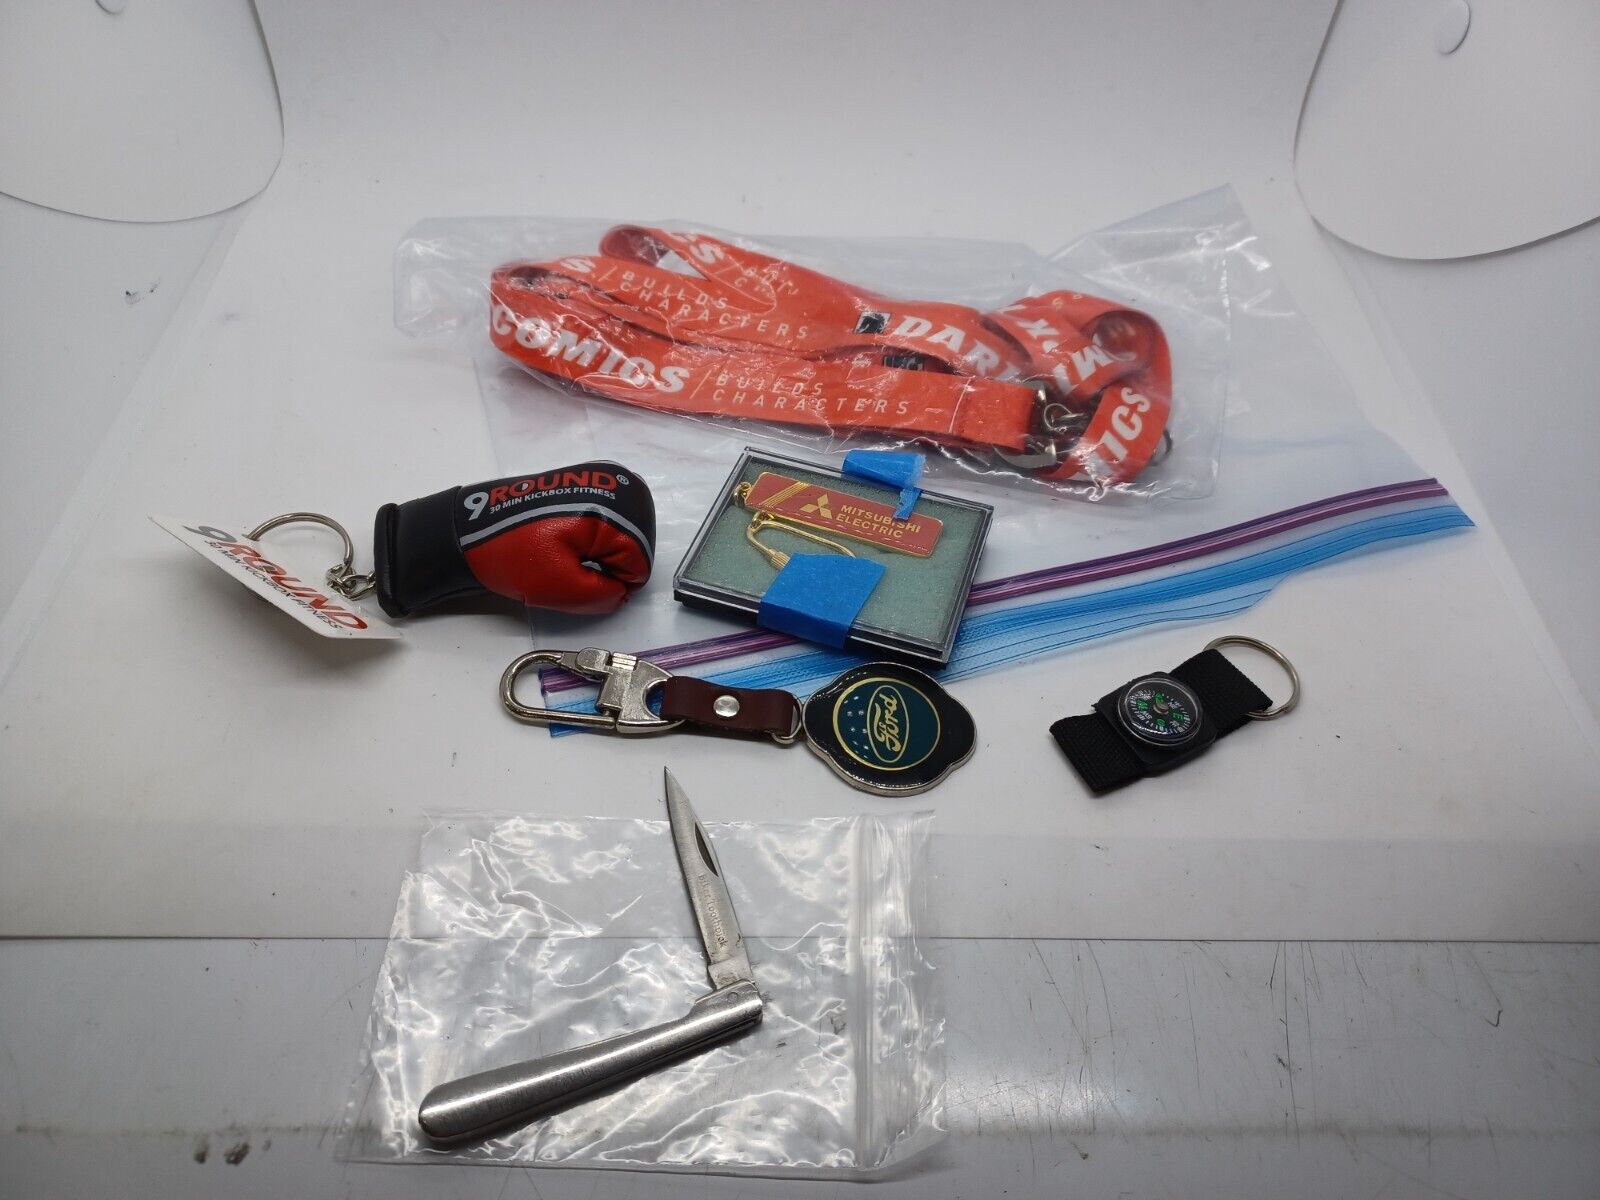 Vintage & Modern Key Chains Advertising Key Rings Con Lanyards and Knife Lot